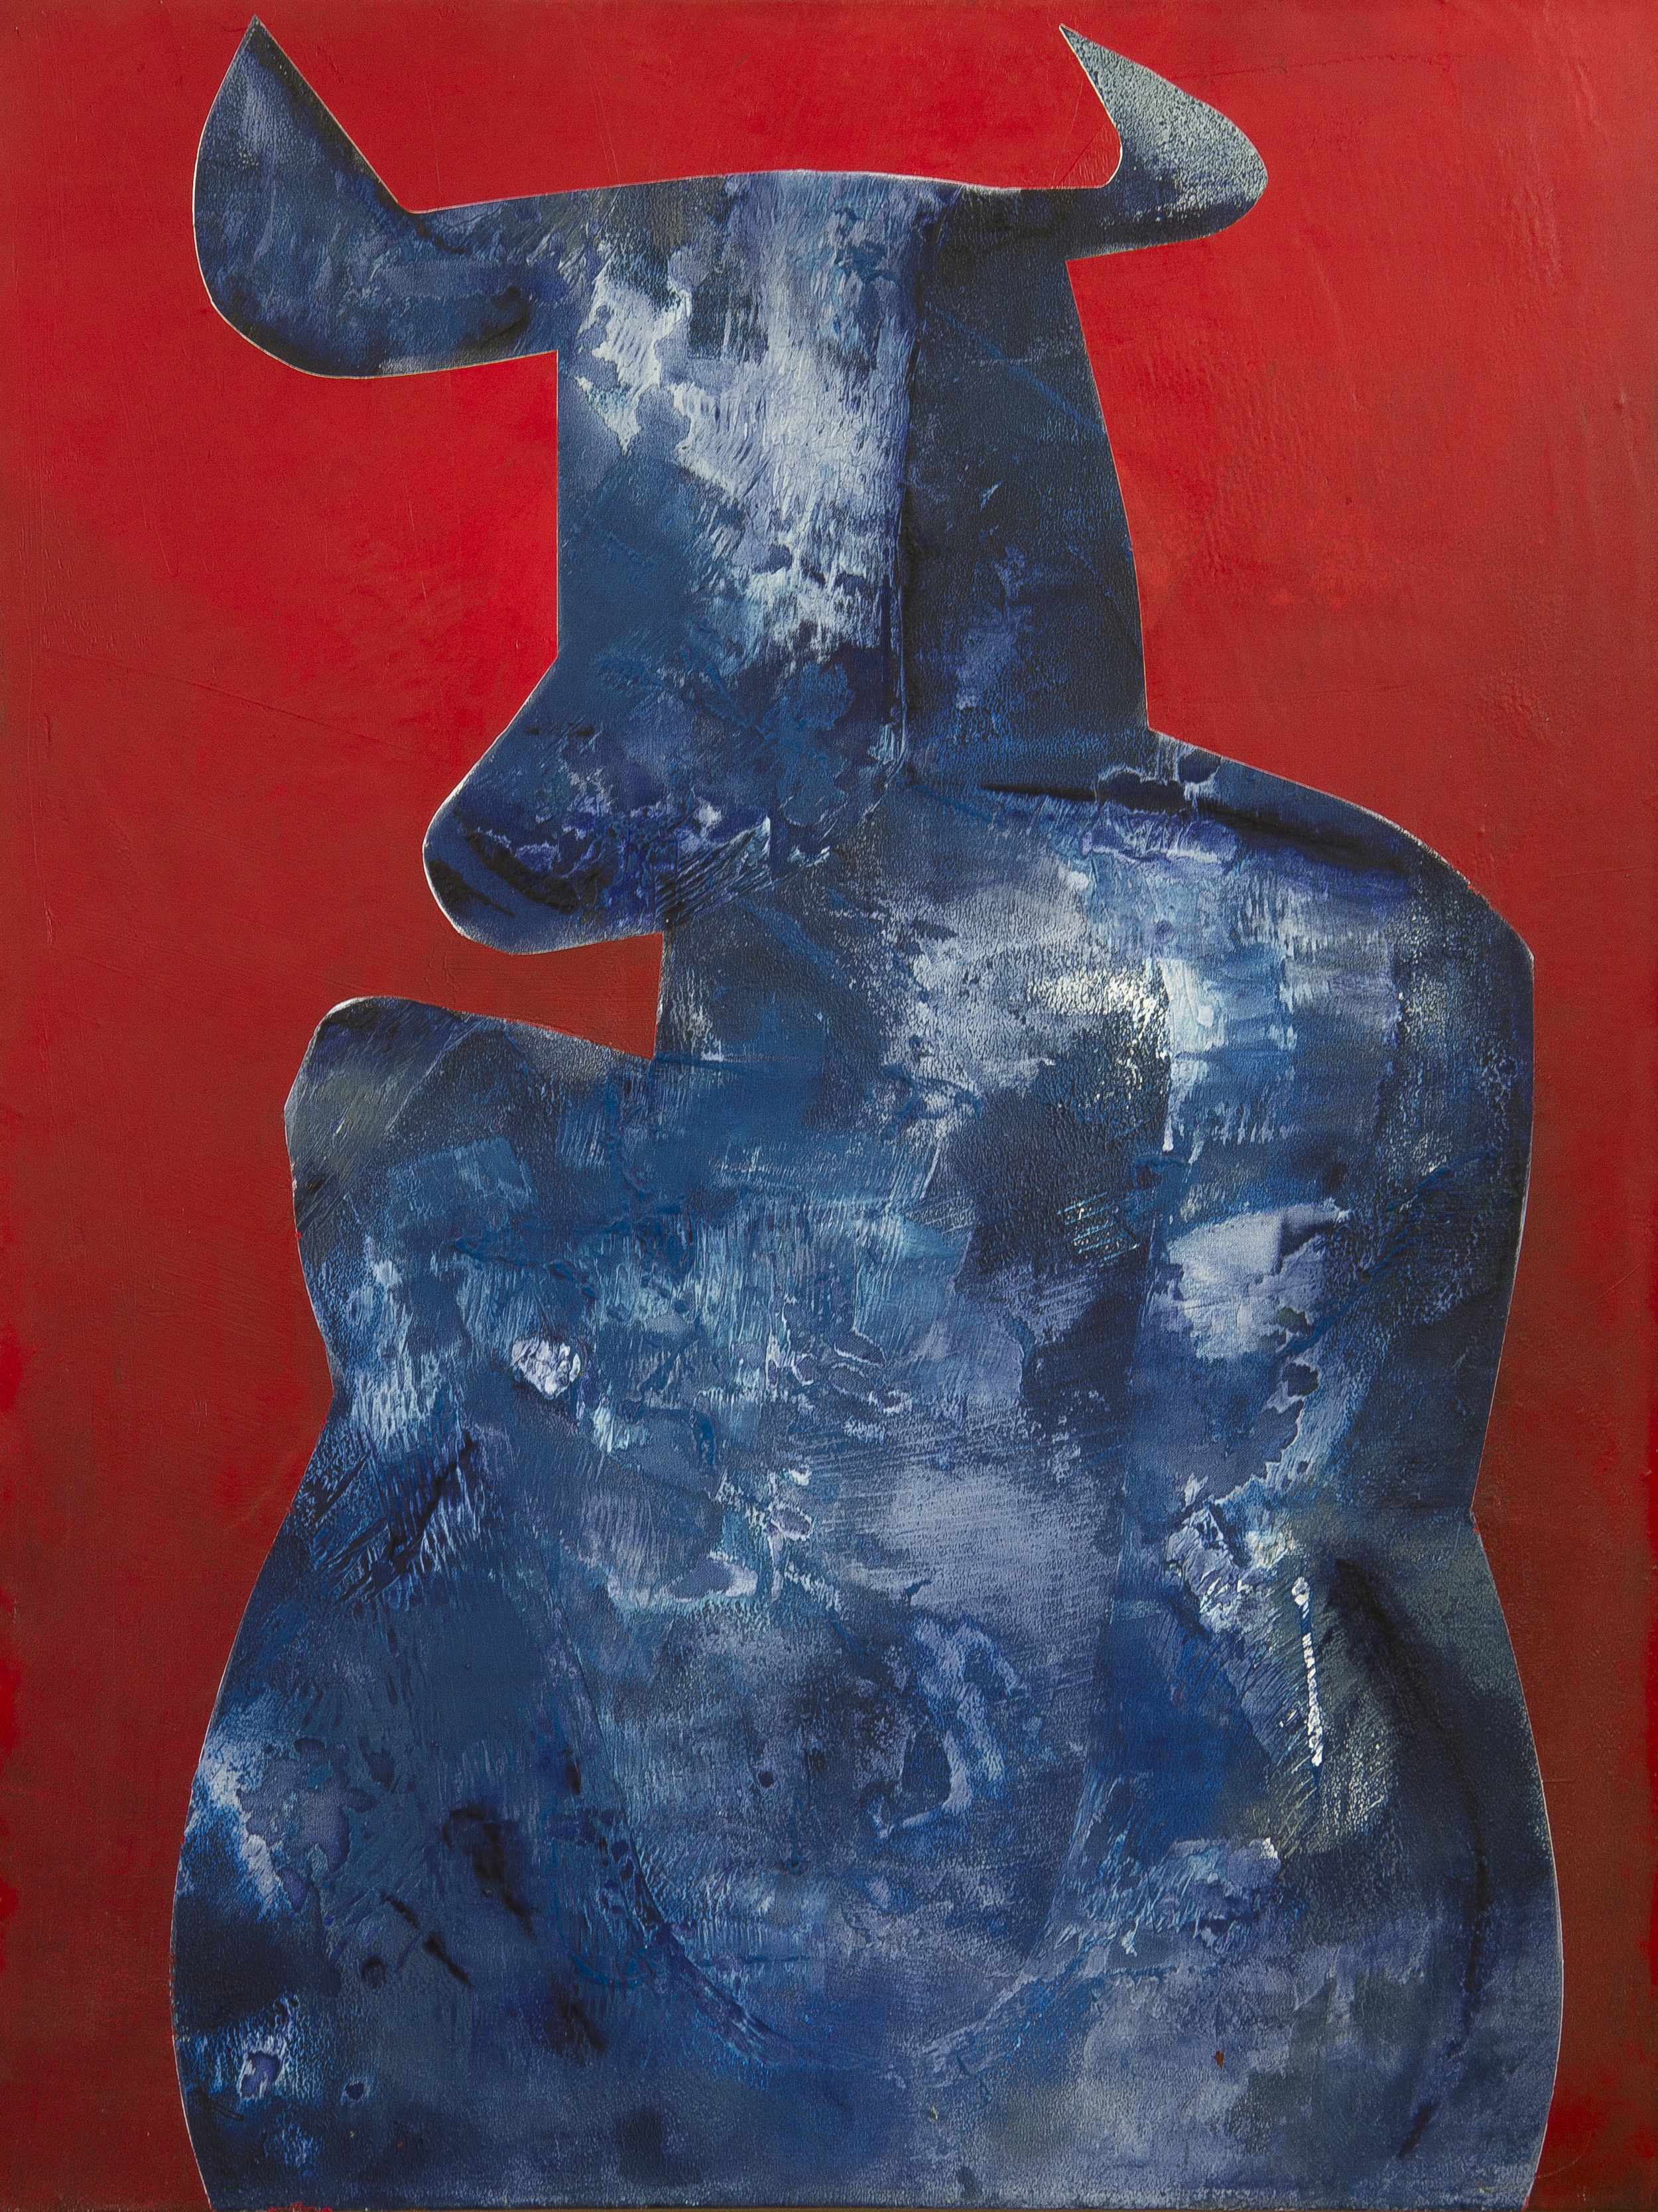  Blue Taurus acrylic on canvas 42 x 32 inches 2011  Unavailable  &nbsp; 